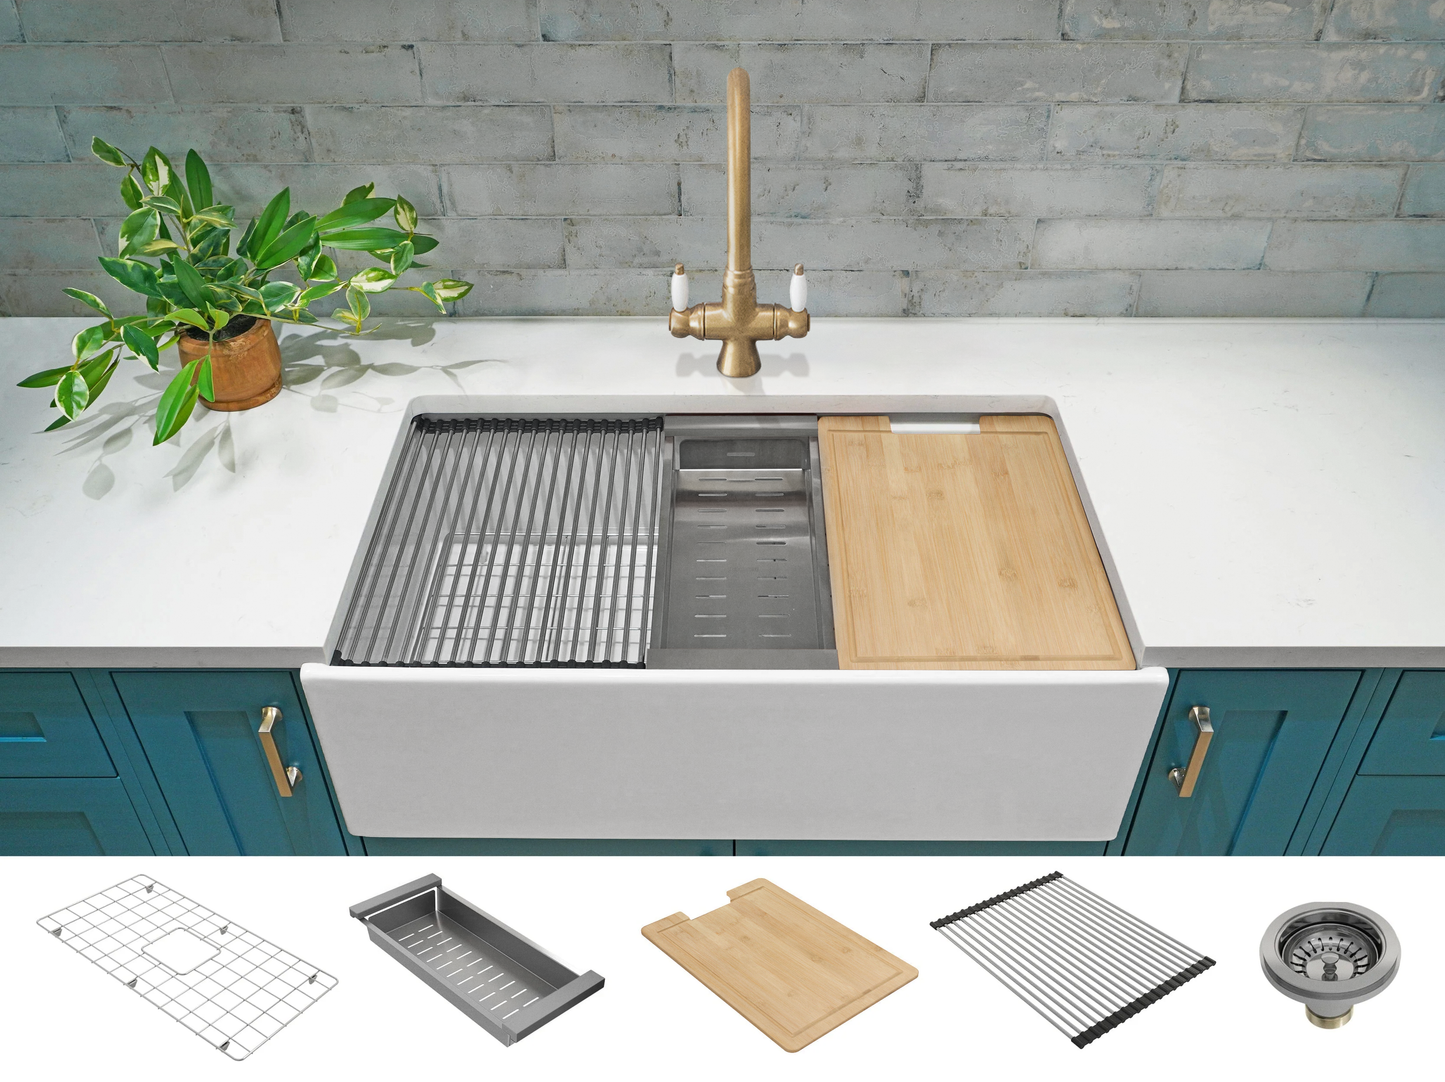 Double Farmhouse Sink With Chopping Board,, Grid, Grate Waste & Cullender  - 833mm